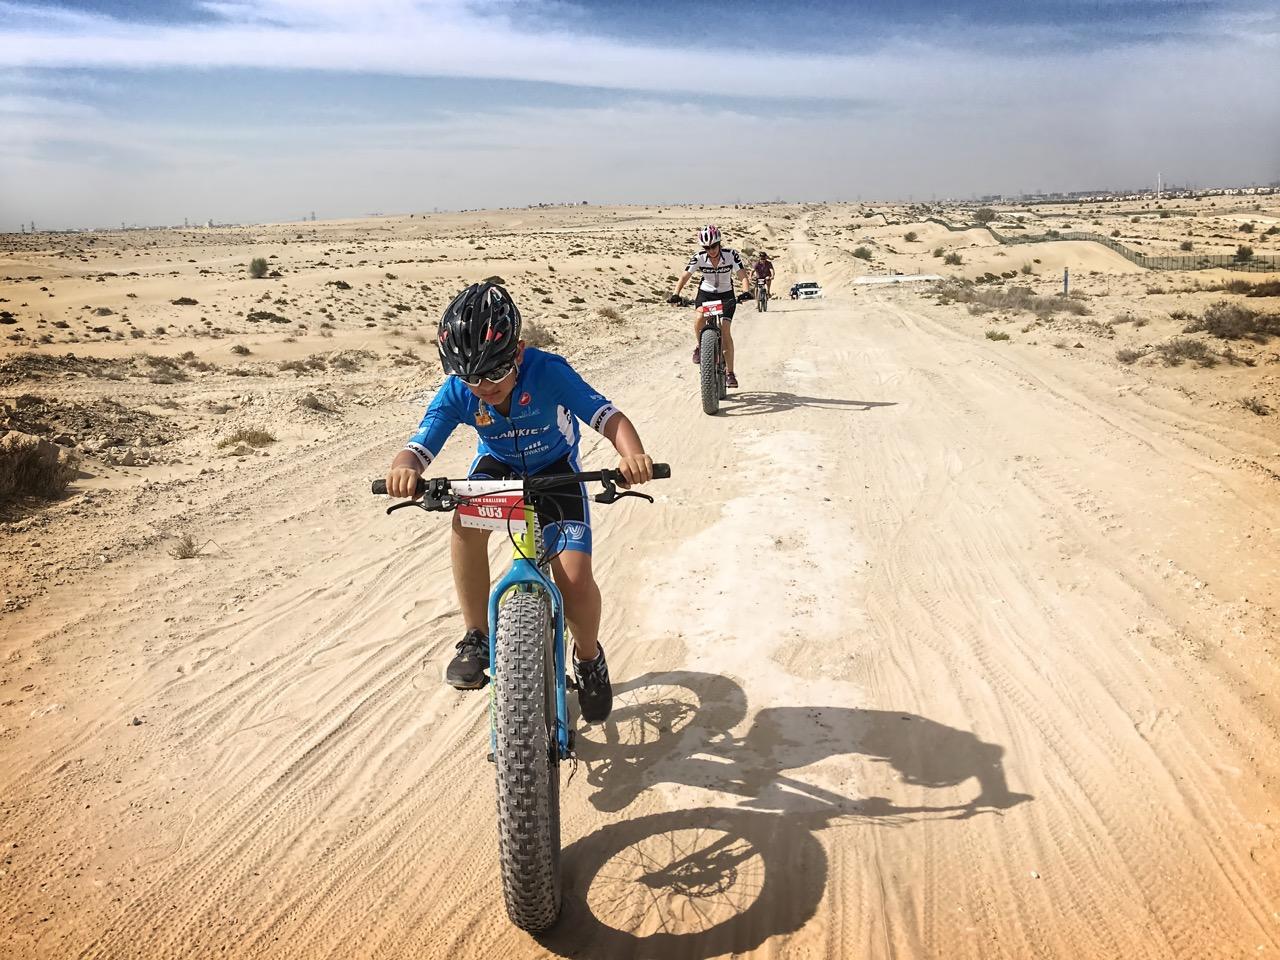 Jason's son Jack taking part in the 20 km off road Pulse Cycling event on his 'Fat Boy'.